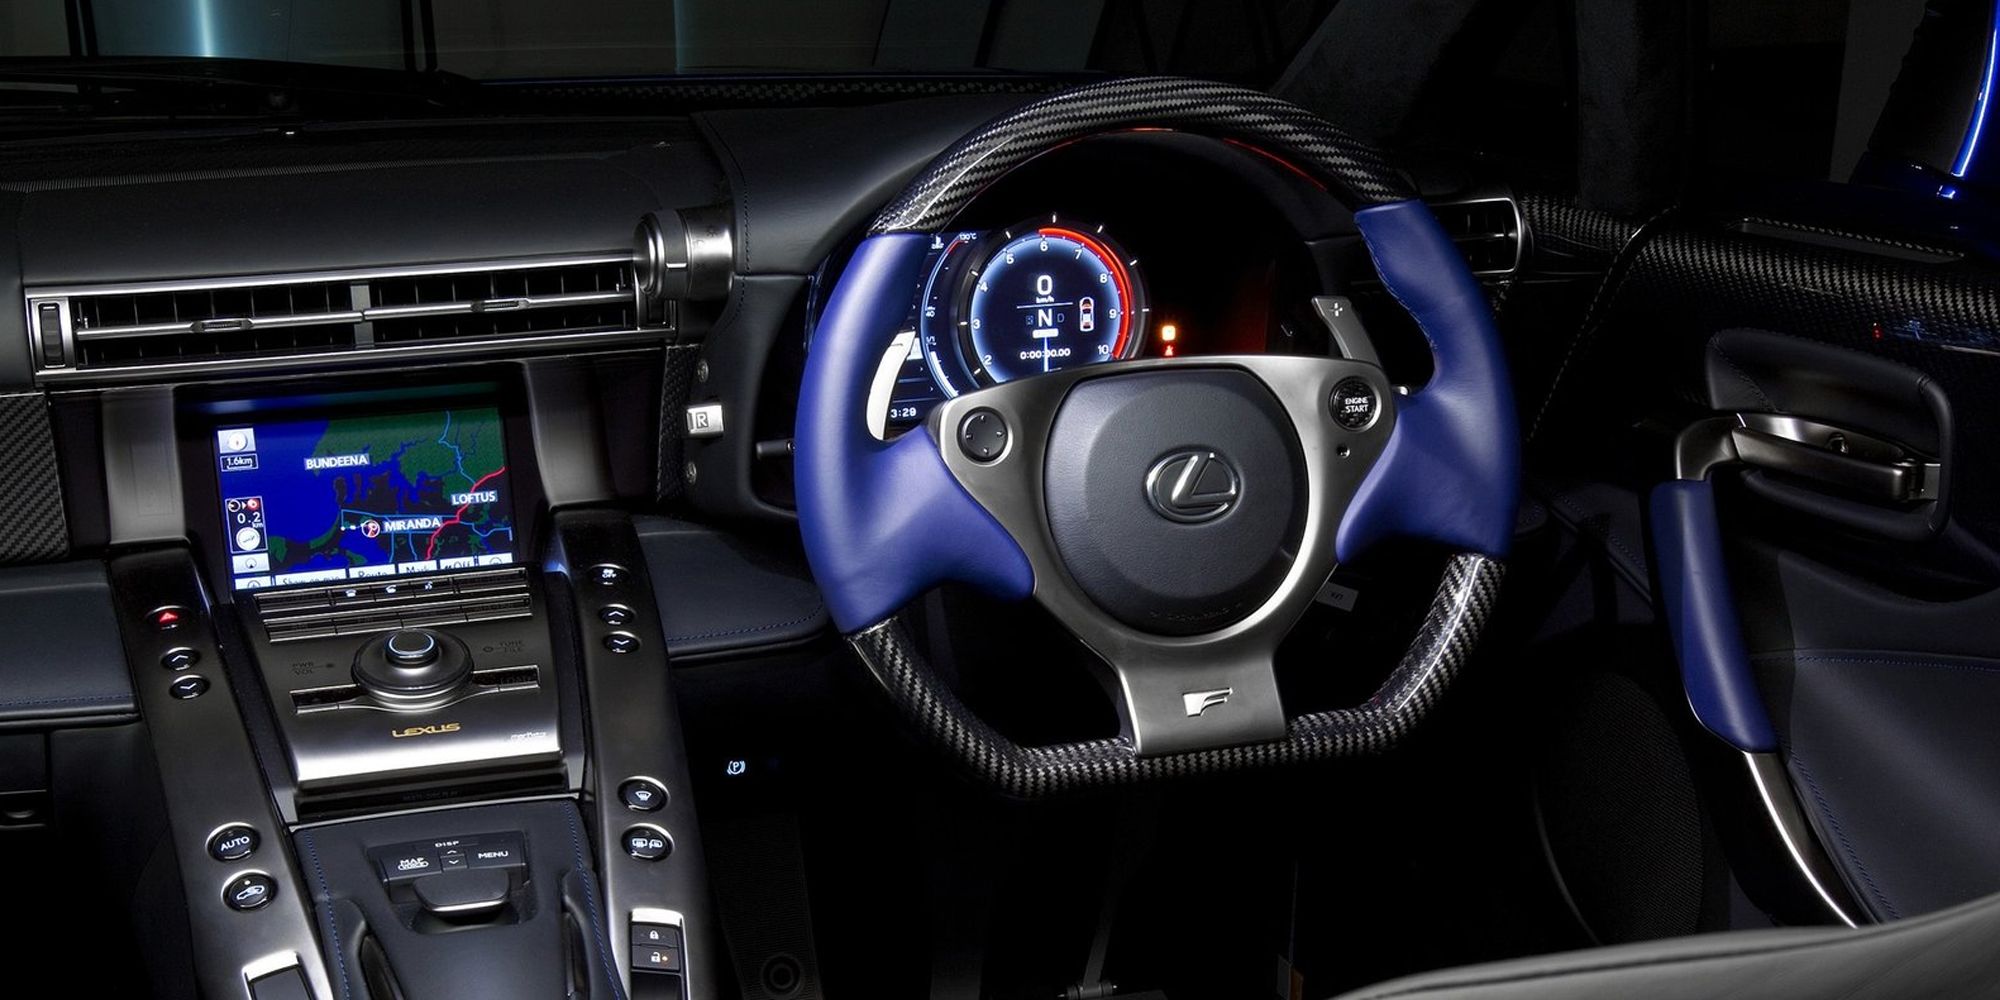 The interior of the LFA, RHD, black leather with blue accents